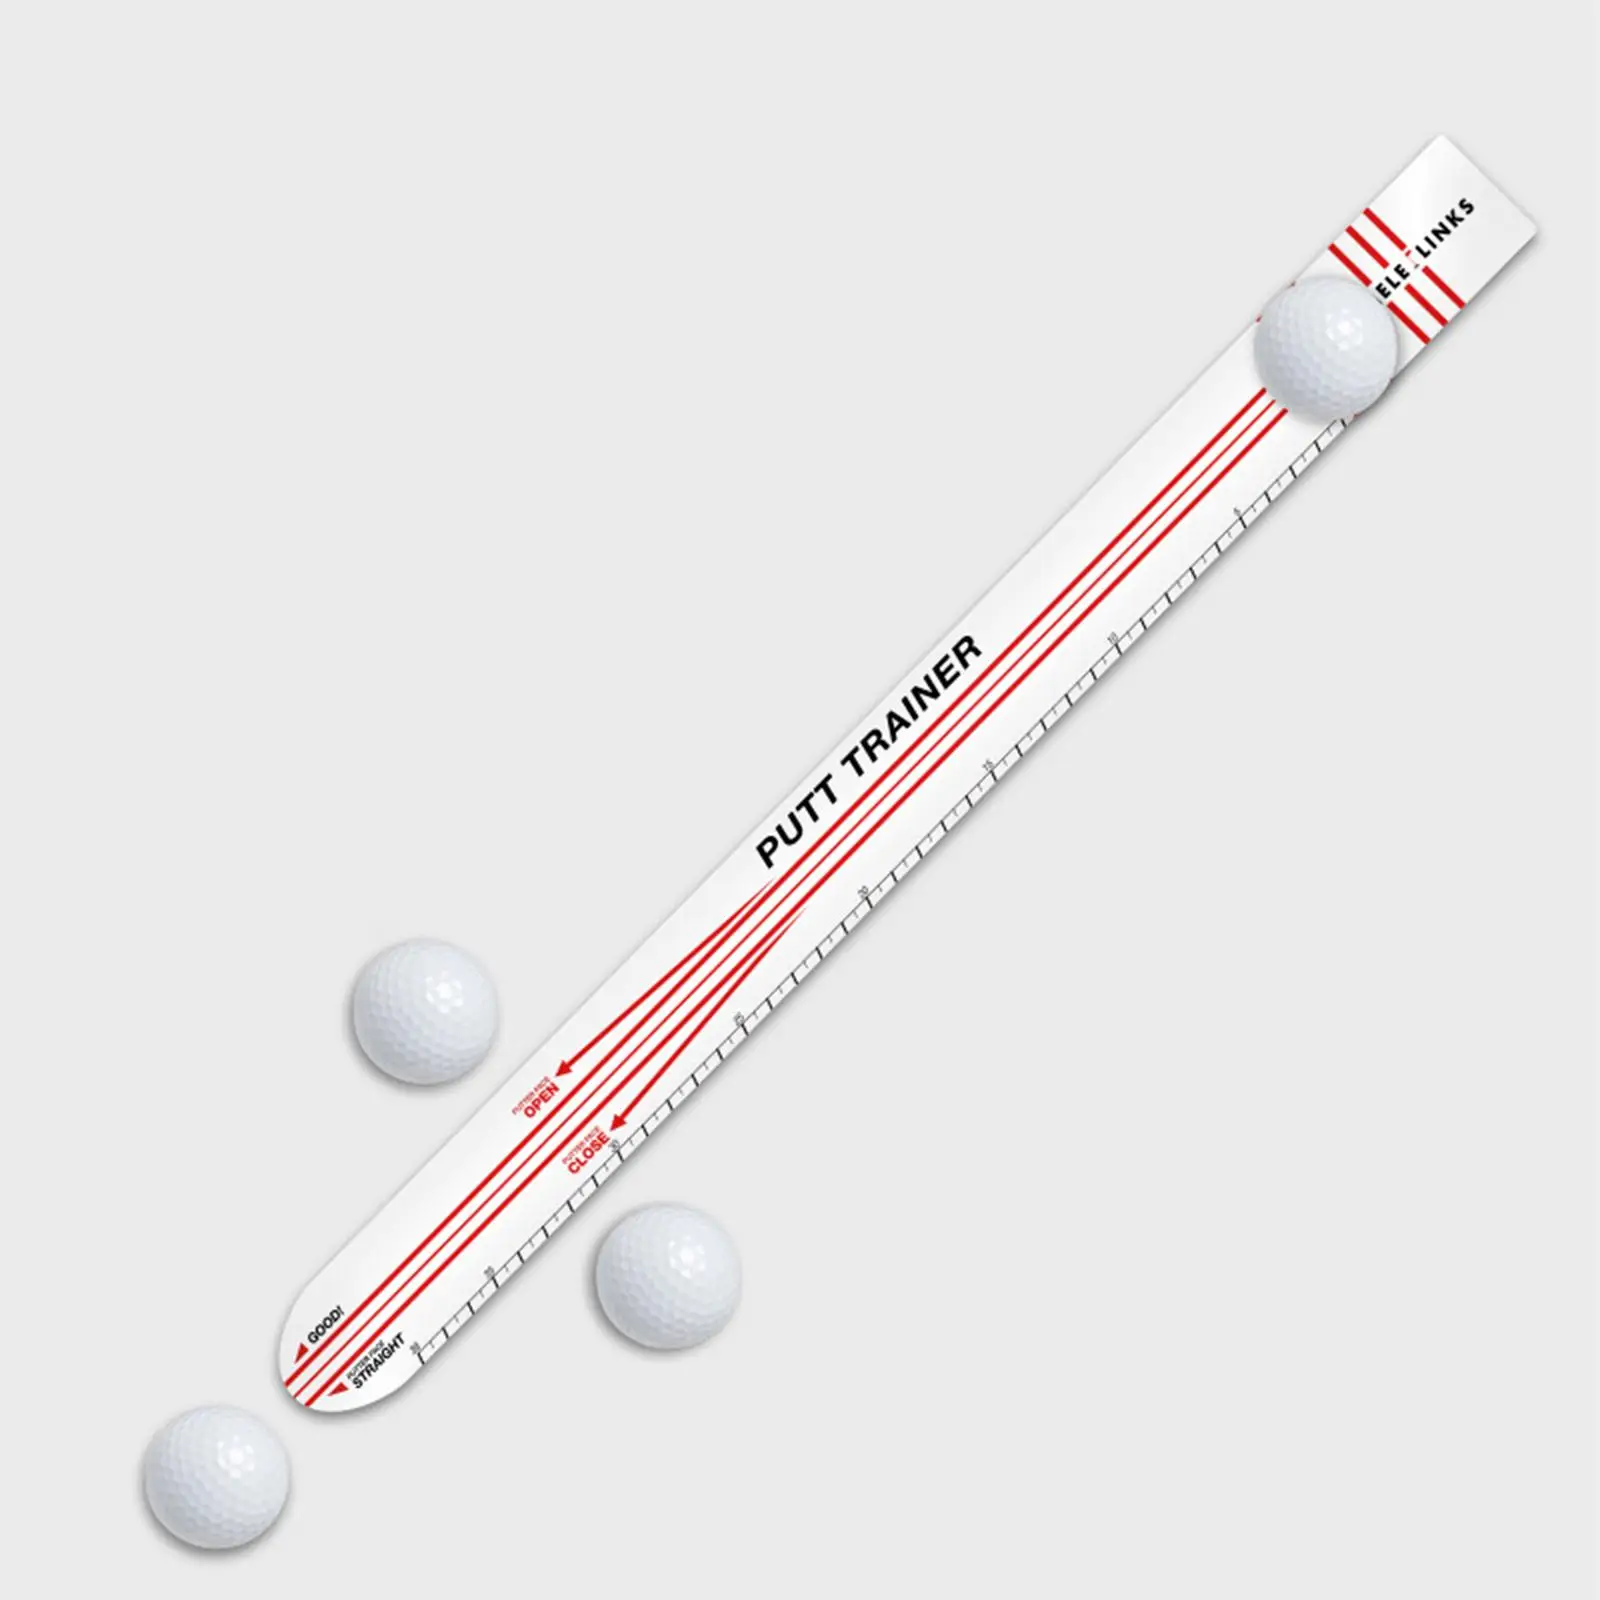 Golf Putter Check Putting Practice Straight Ruler Exerciser Golf Accessories for Beginner